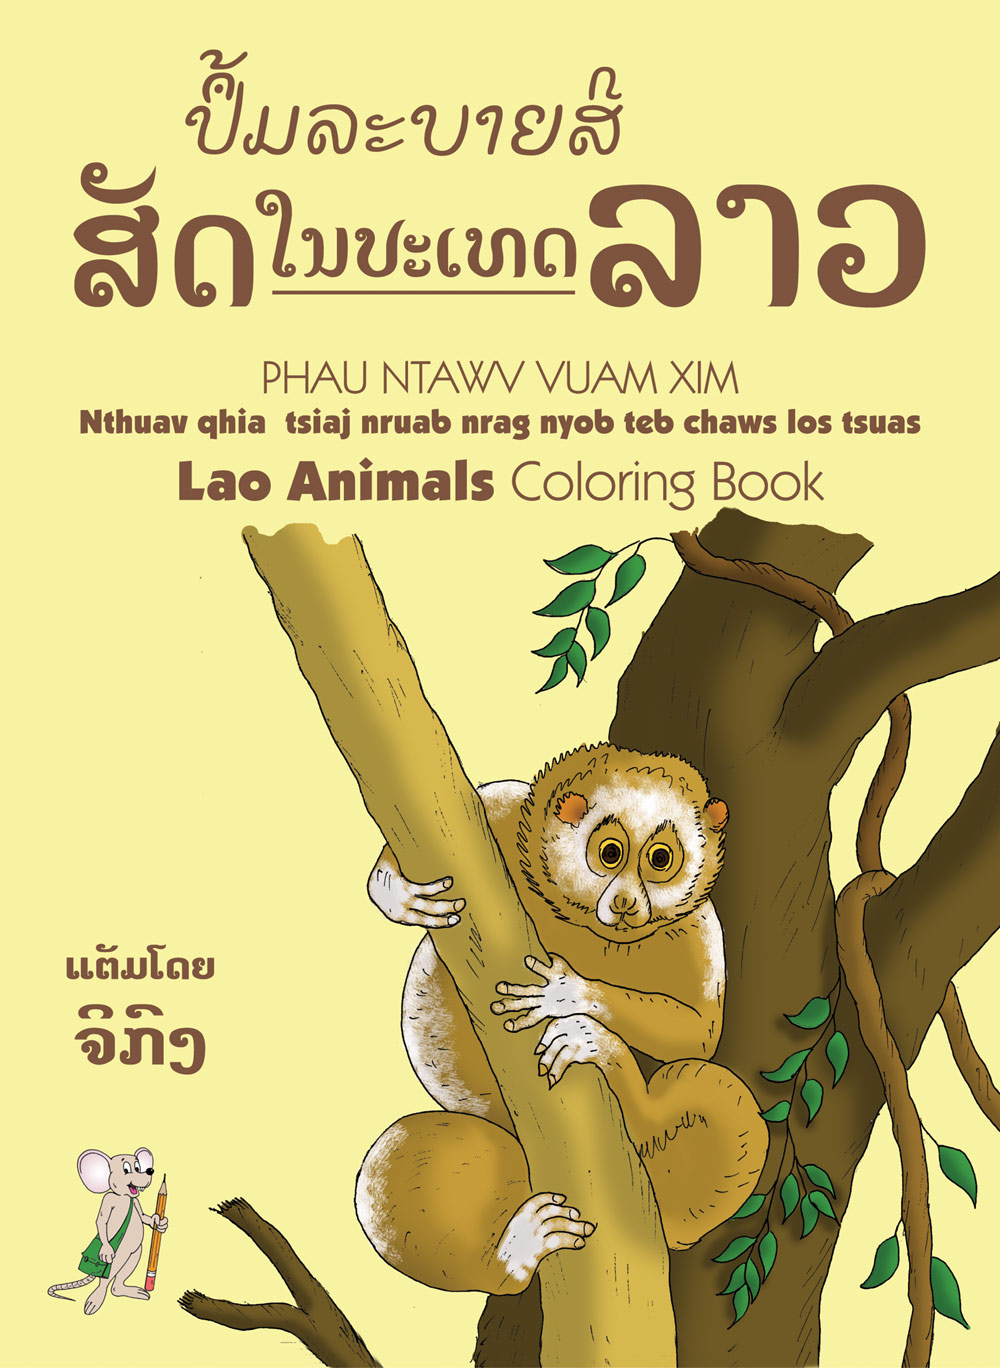 Lao Animals Coloring Book large book cover, published in Lao, Hmong, and English